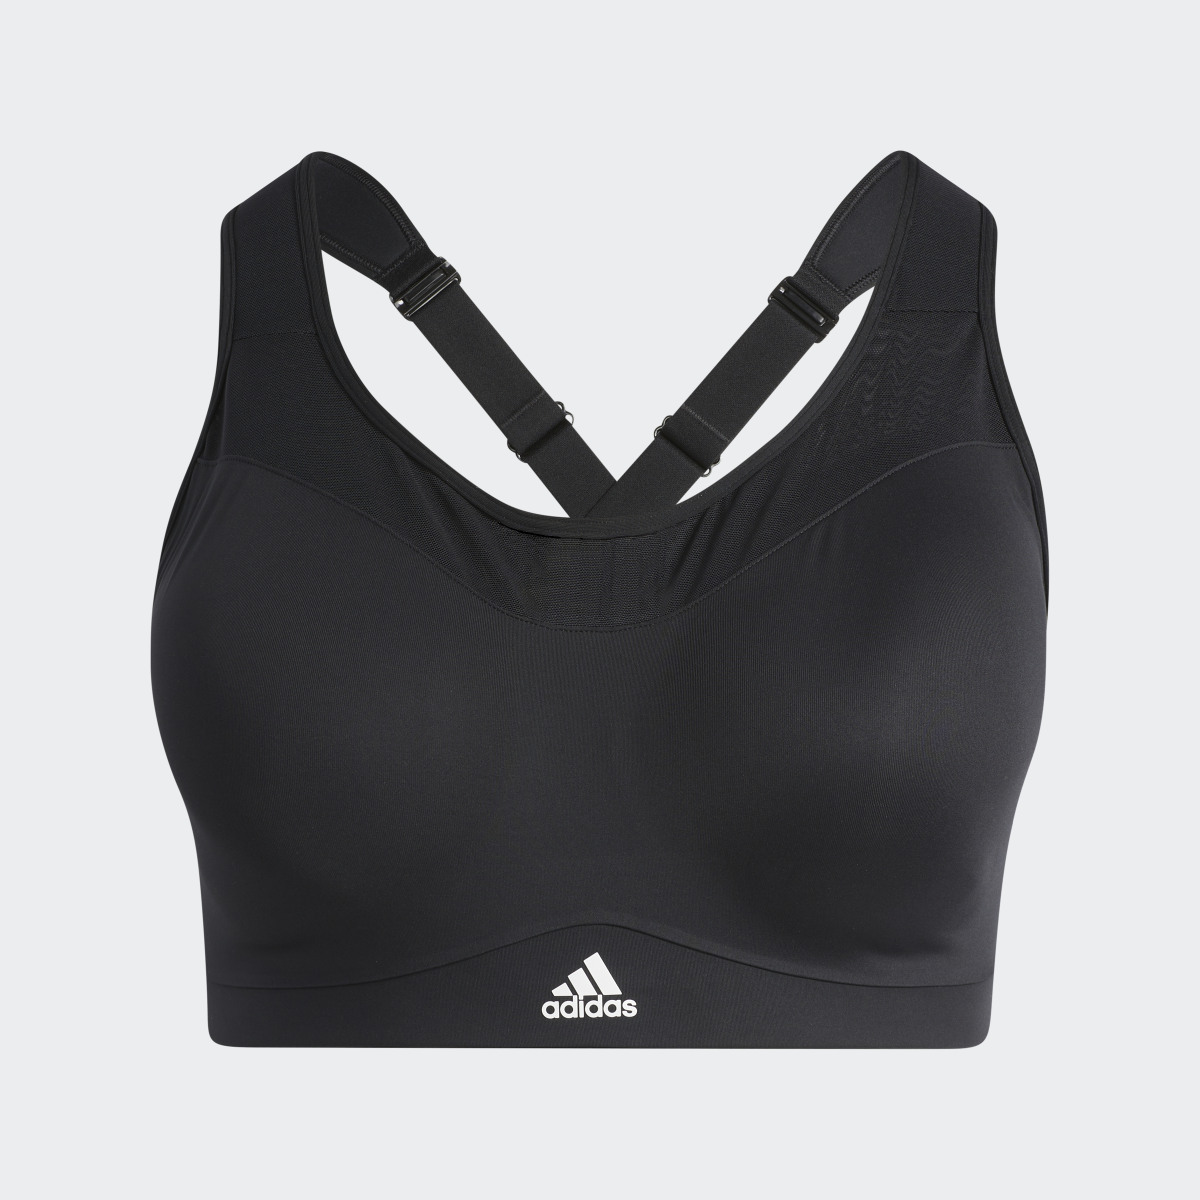 Adidas TLRD Impact Training High-Support Bra (Plus Size). 5